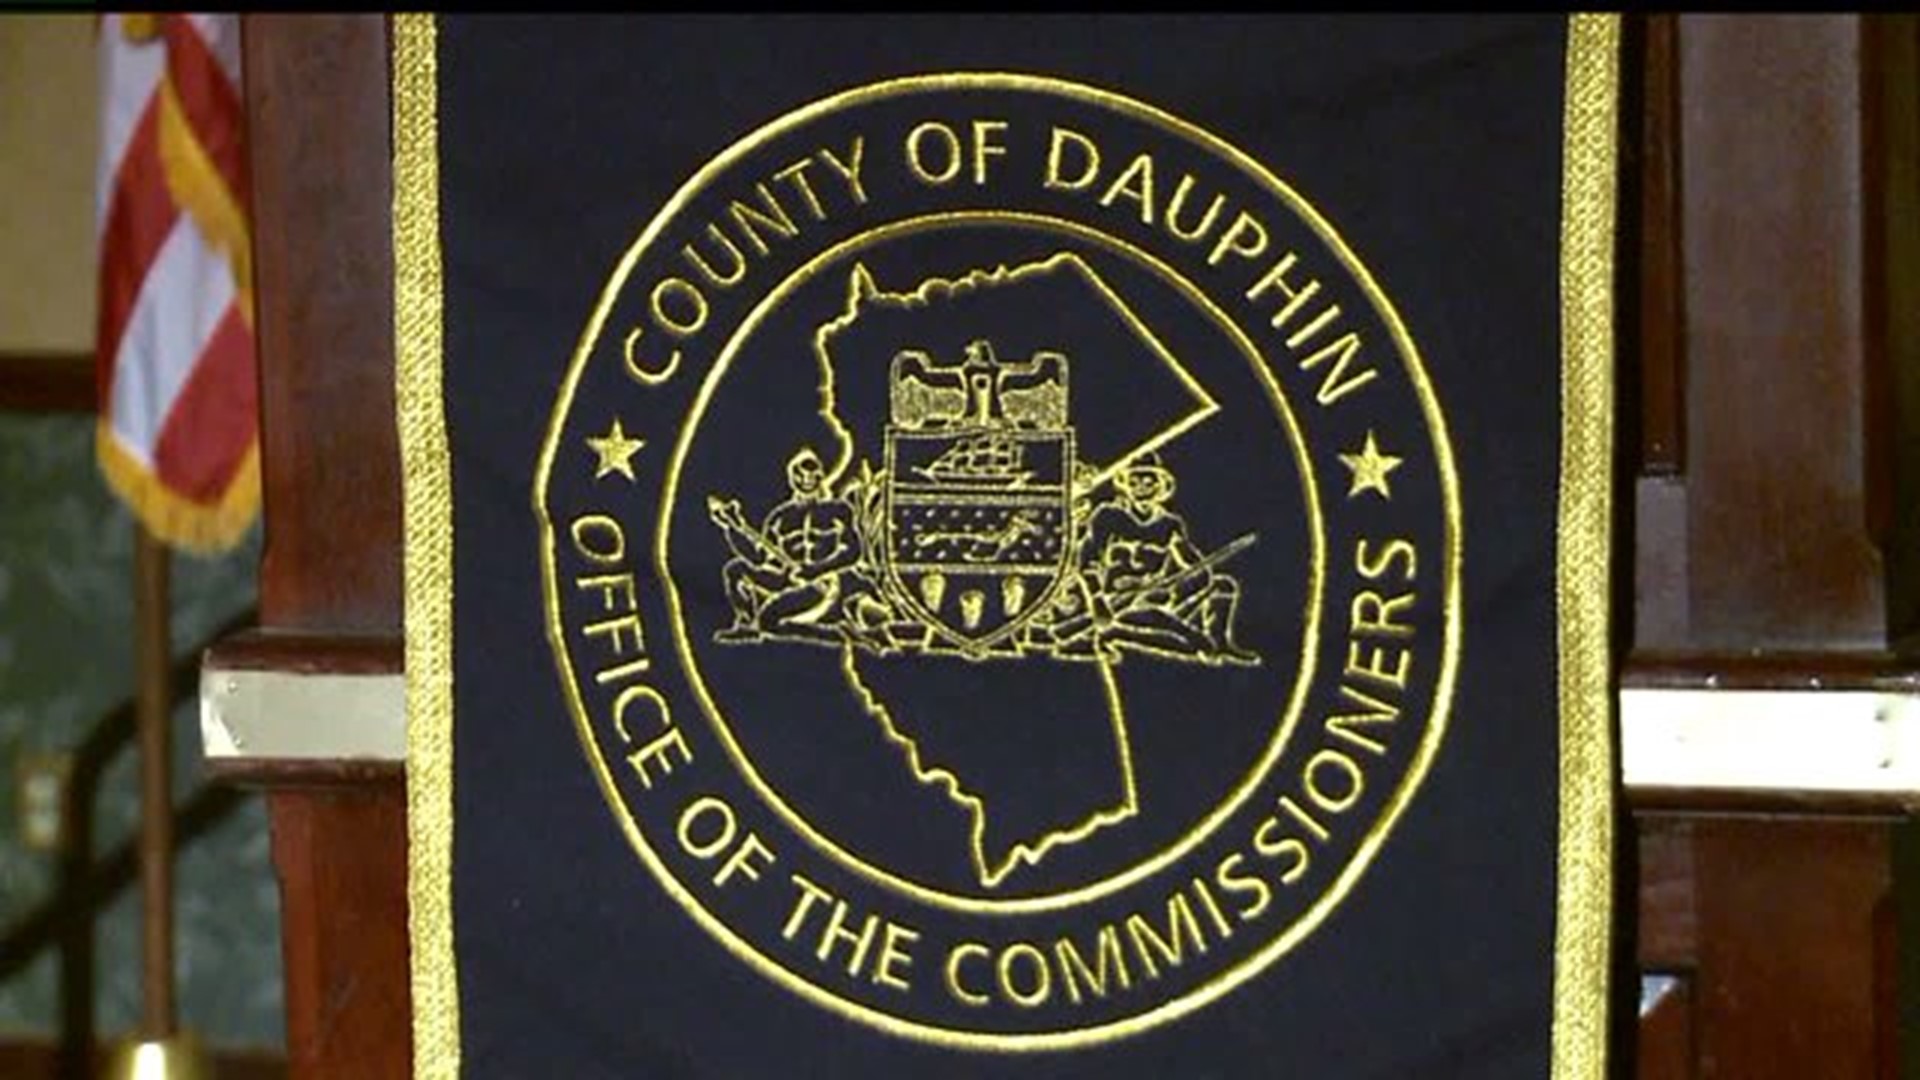 Annual "State of The County" Address in Dauphin County